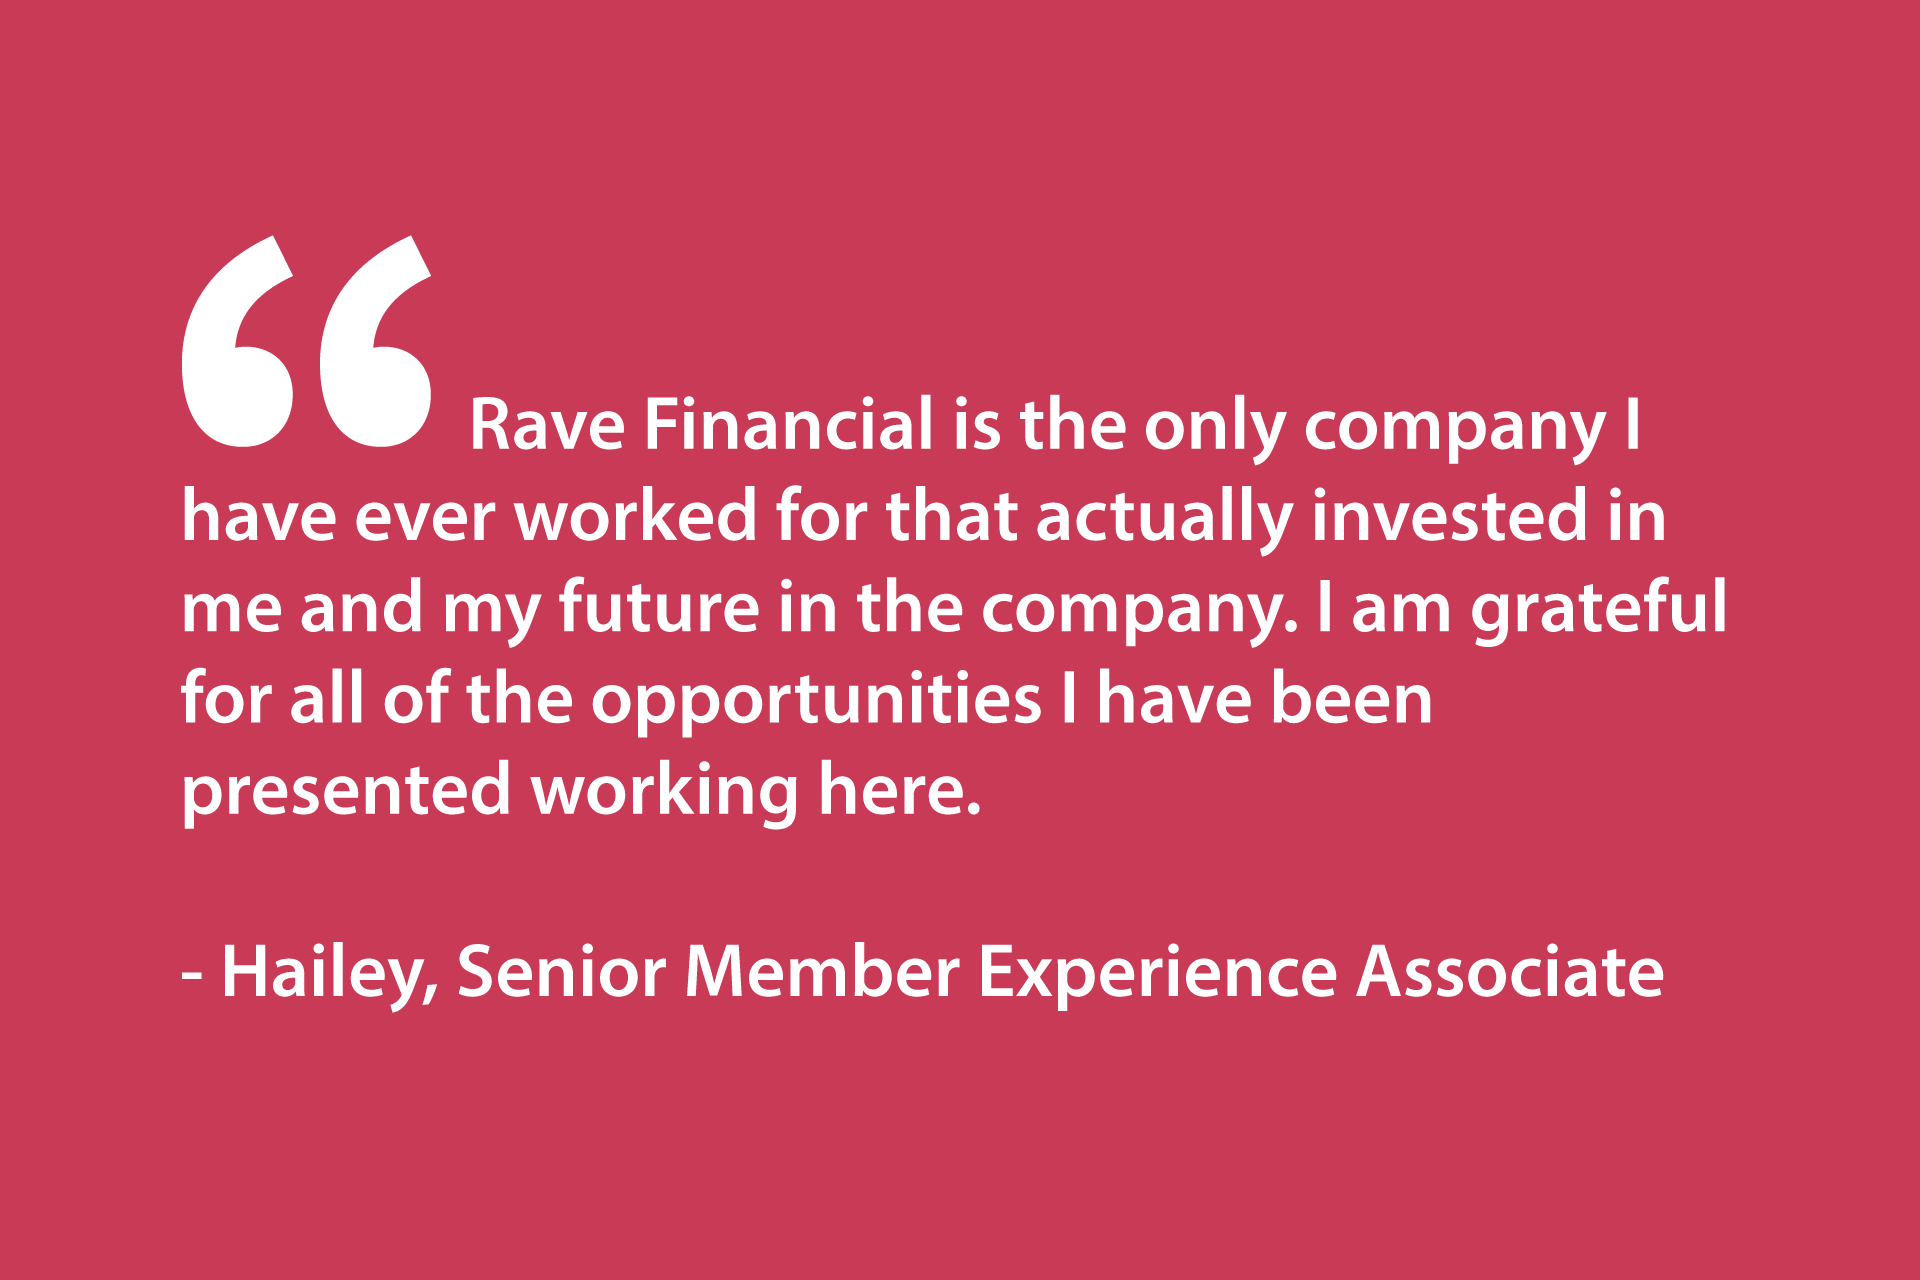 Rave Financial is the only company I have ever worked for that actually invested in me and my future in the company. I am grateful for all of the opportunities I have been presented working here. - Hailey, Senior Member Experience Associate